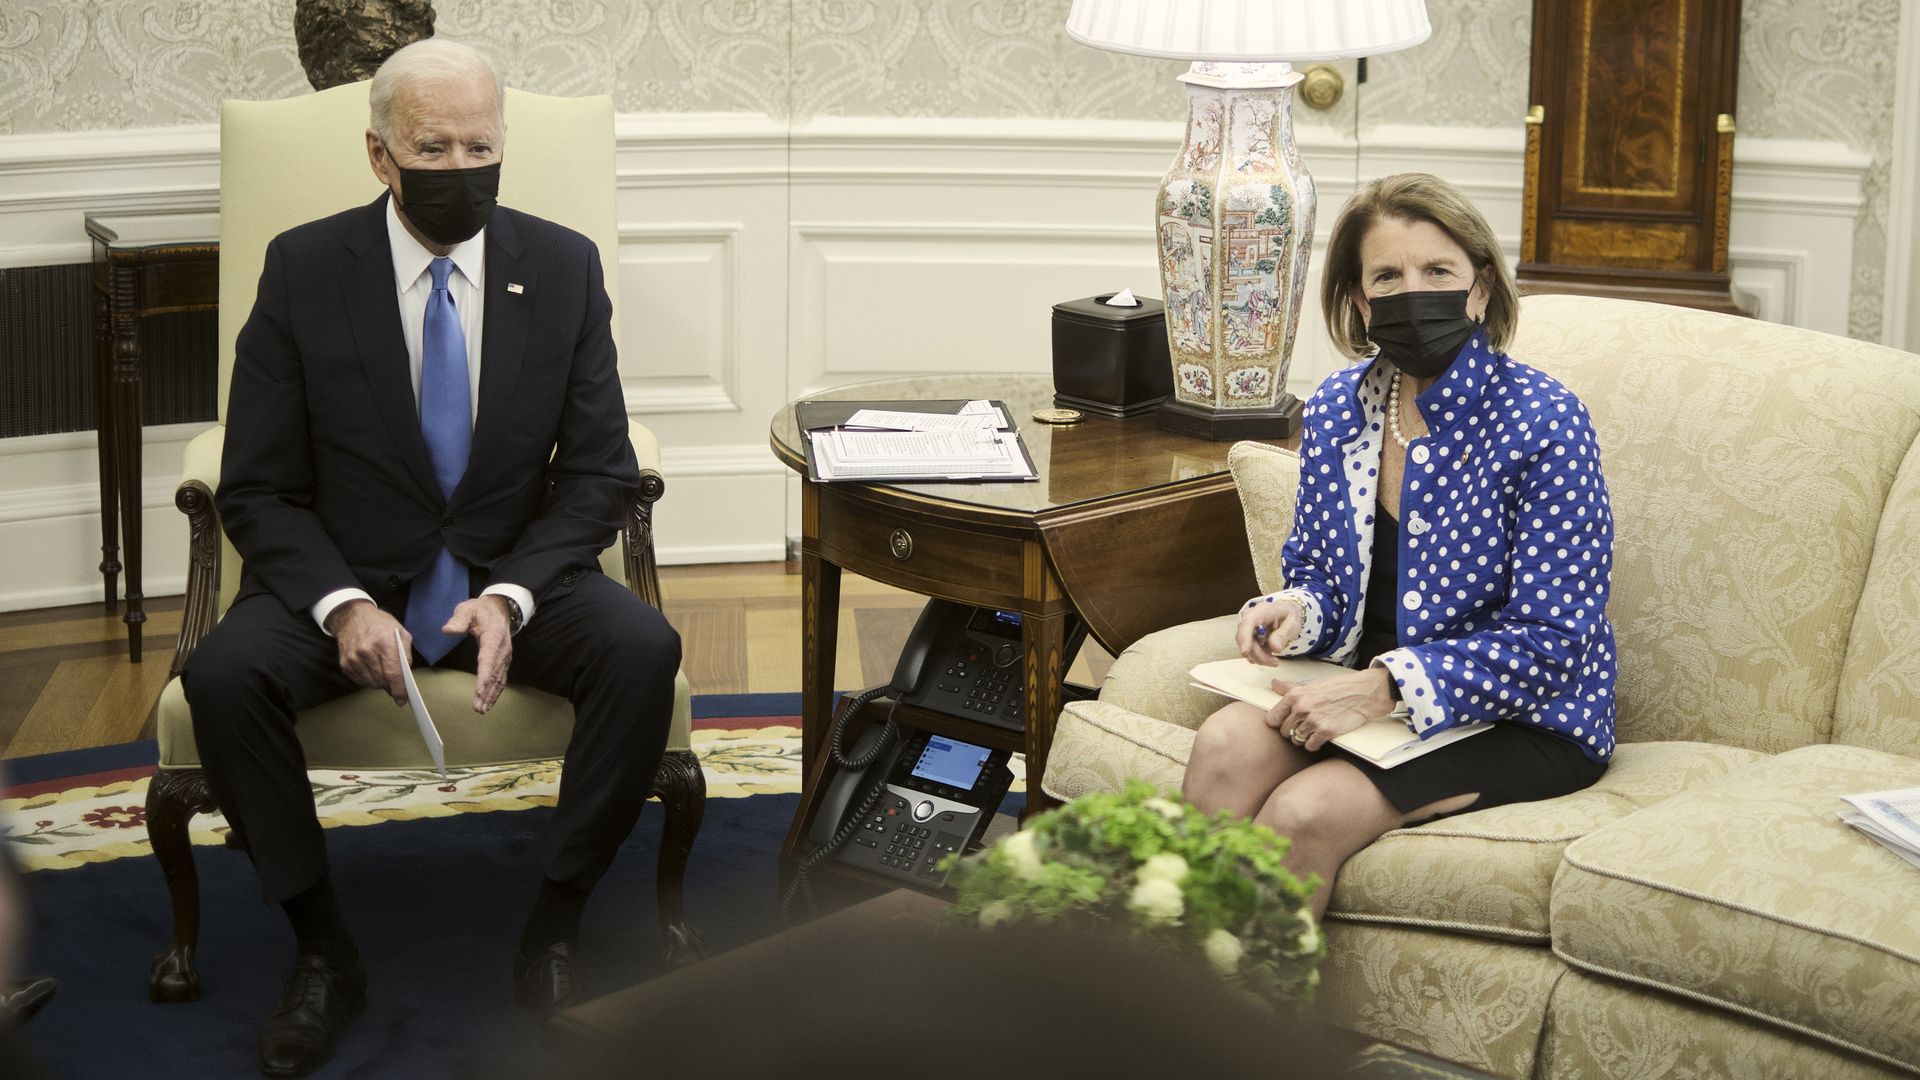 President Biden is seen sitting with Sen. Shelley Moore Capito in the Oval Office.